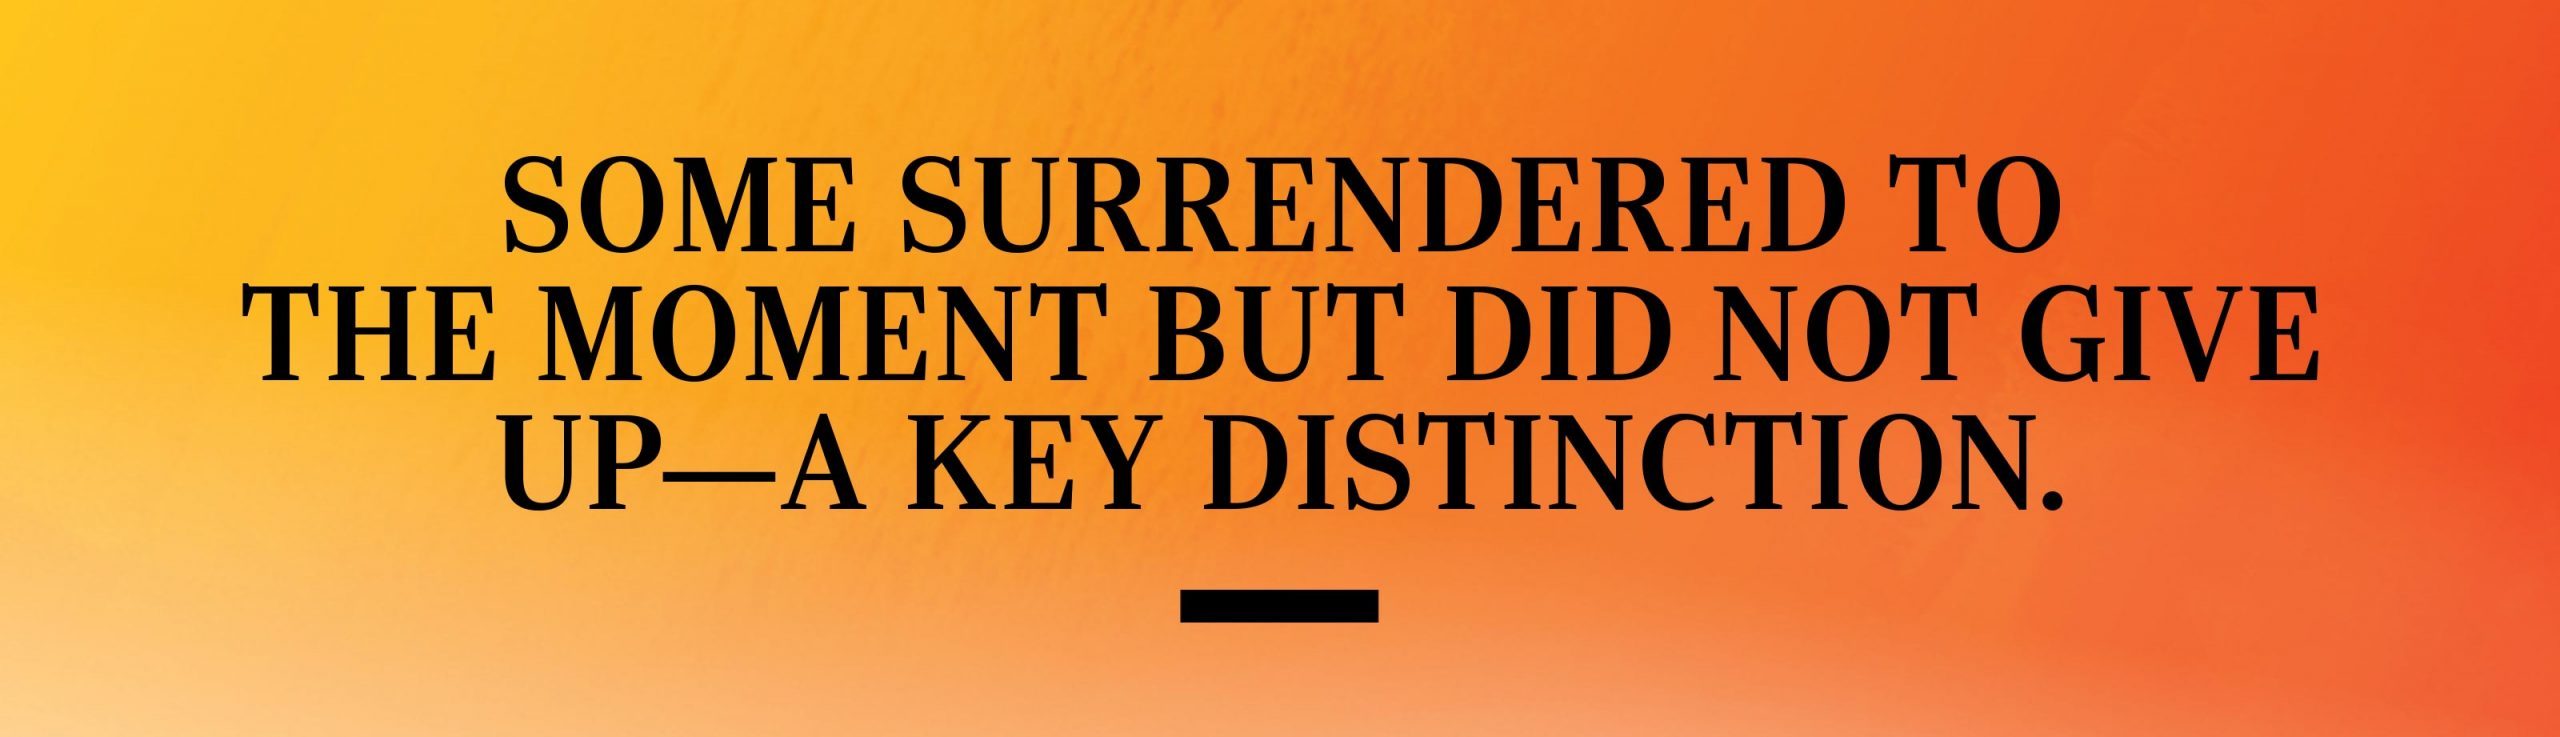 some surrendered to the moment but did not give upa key distinction.